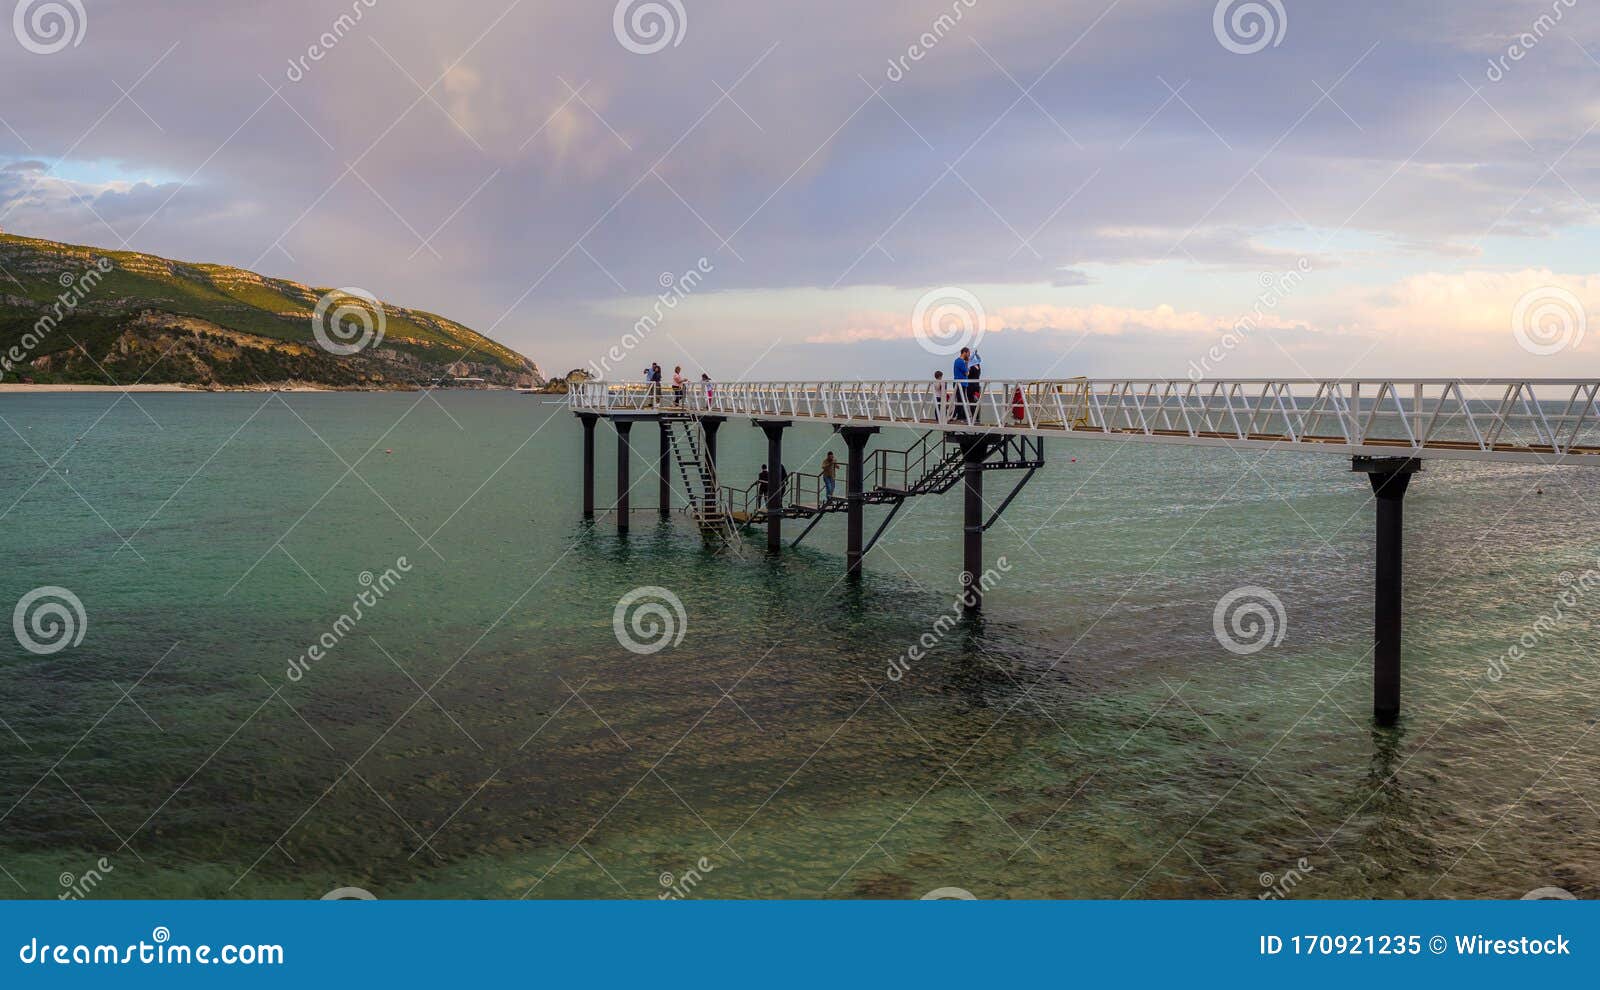 beautiful shot of people on the harbor in parque natural da arrÃÂ¡bida, casal, portugal